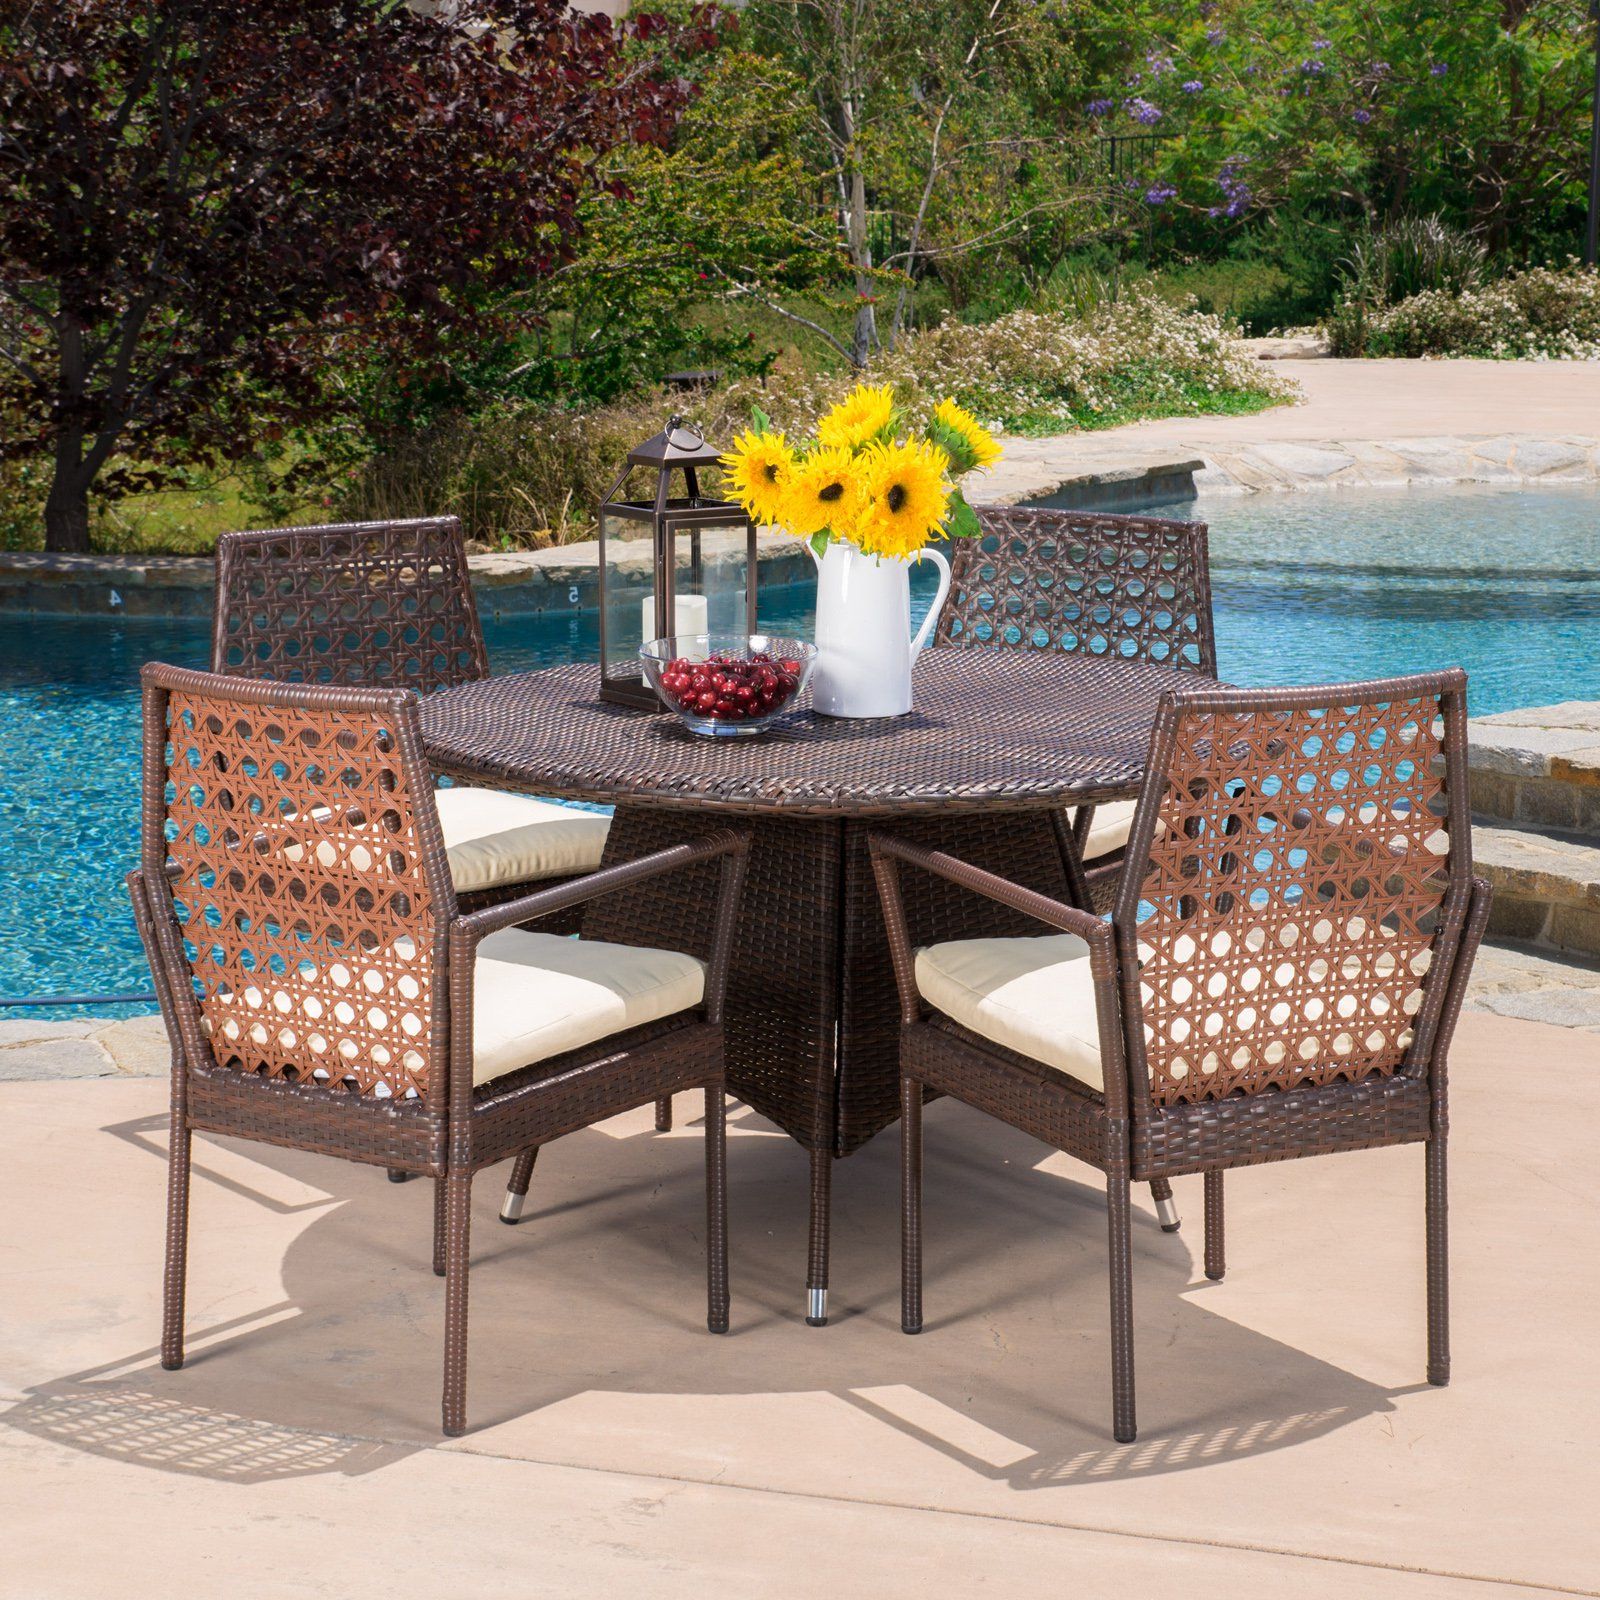 5 Piece Round Dining Sets Inside Well Known Claire Wicker 5 Piece Round Patio Dining Set With Cushion – Walmart (View 2 of 15)